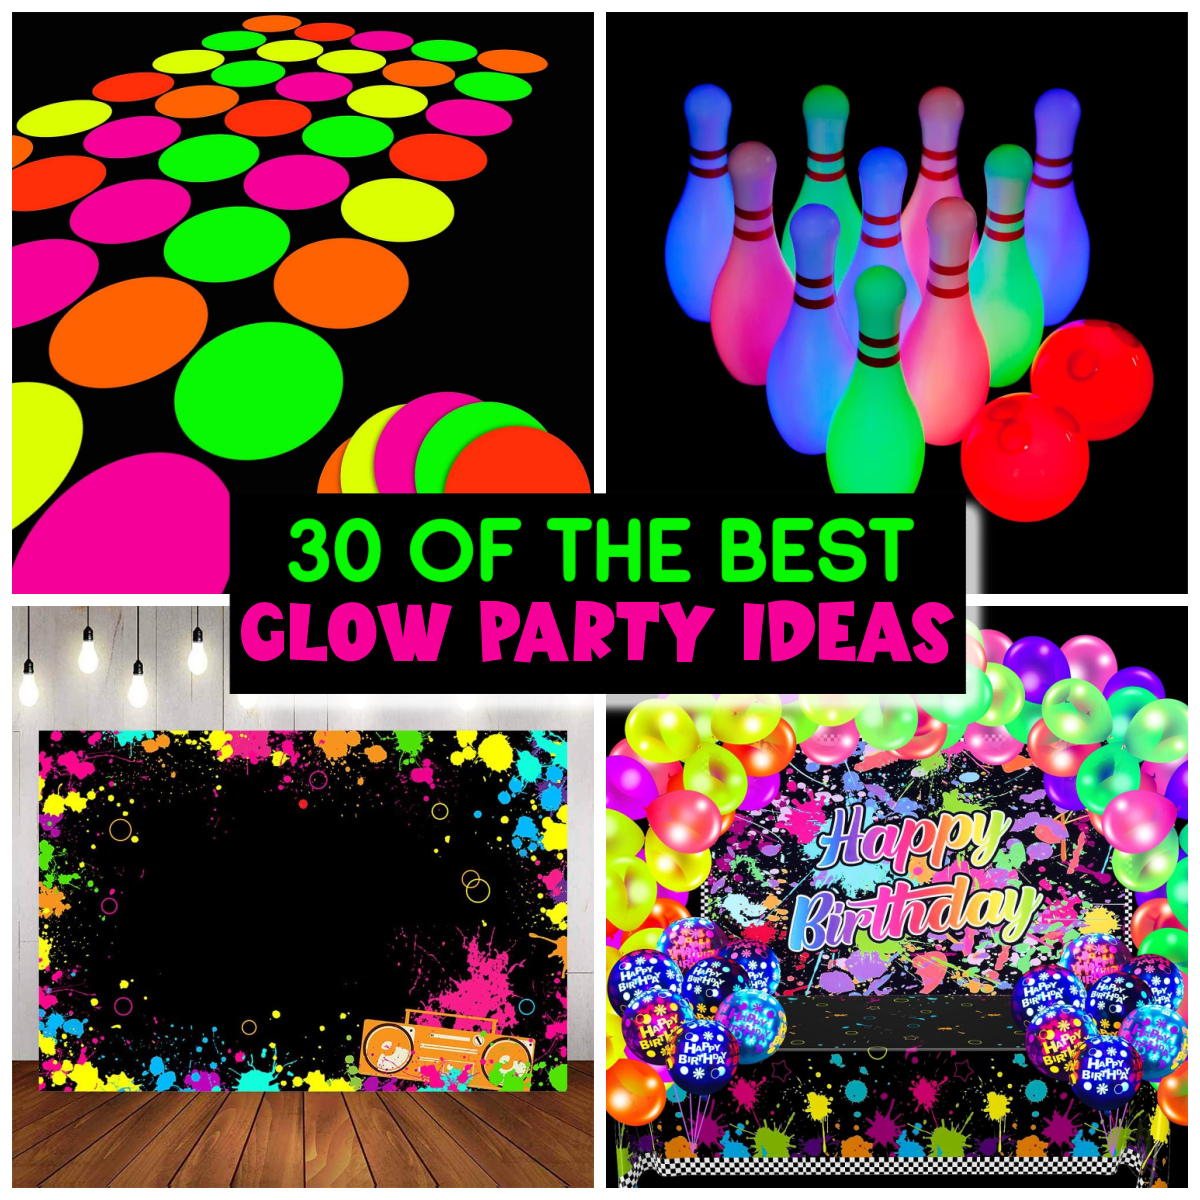 30 of the best glow party ideas.